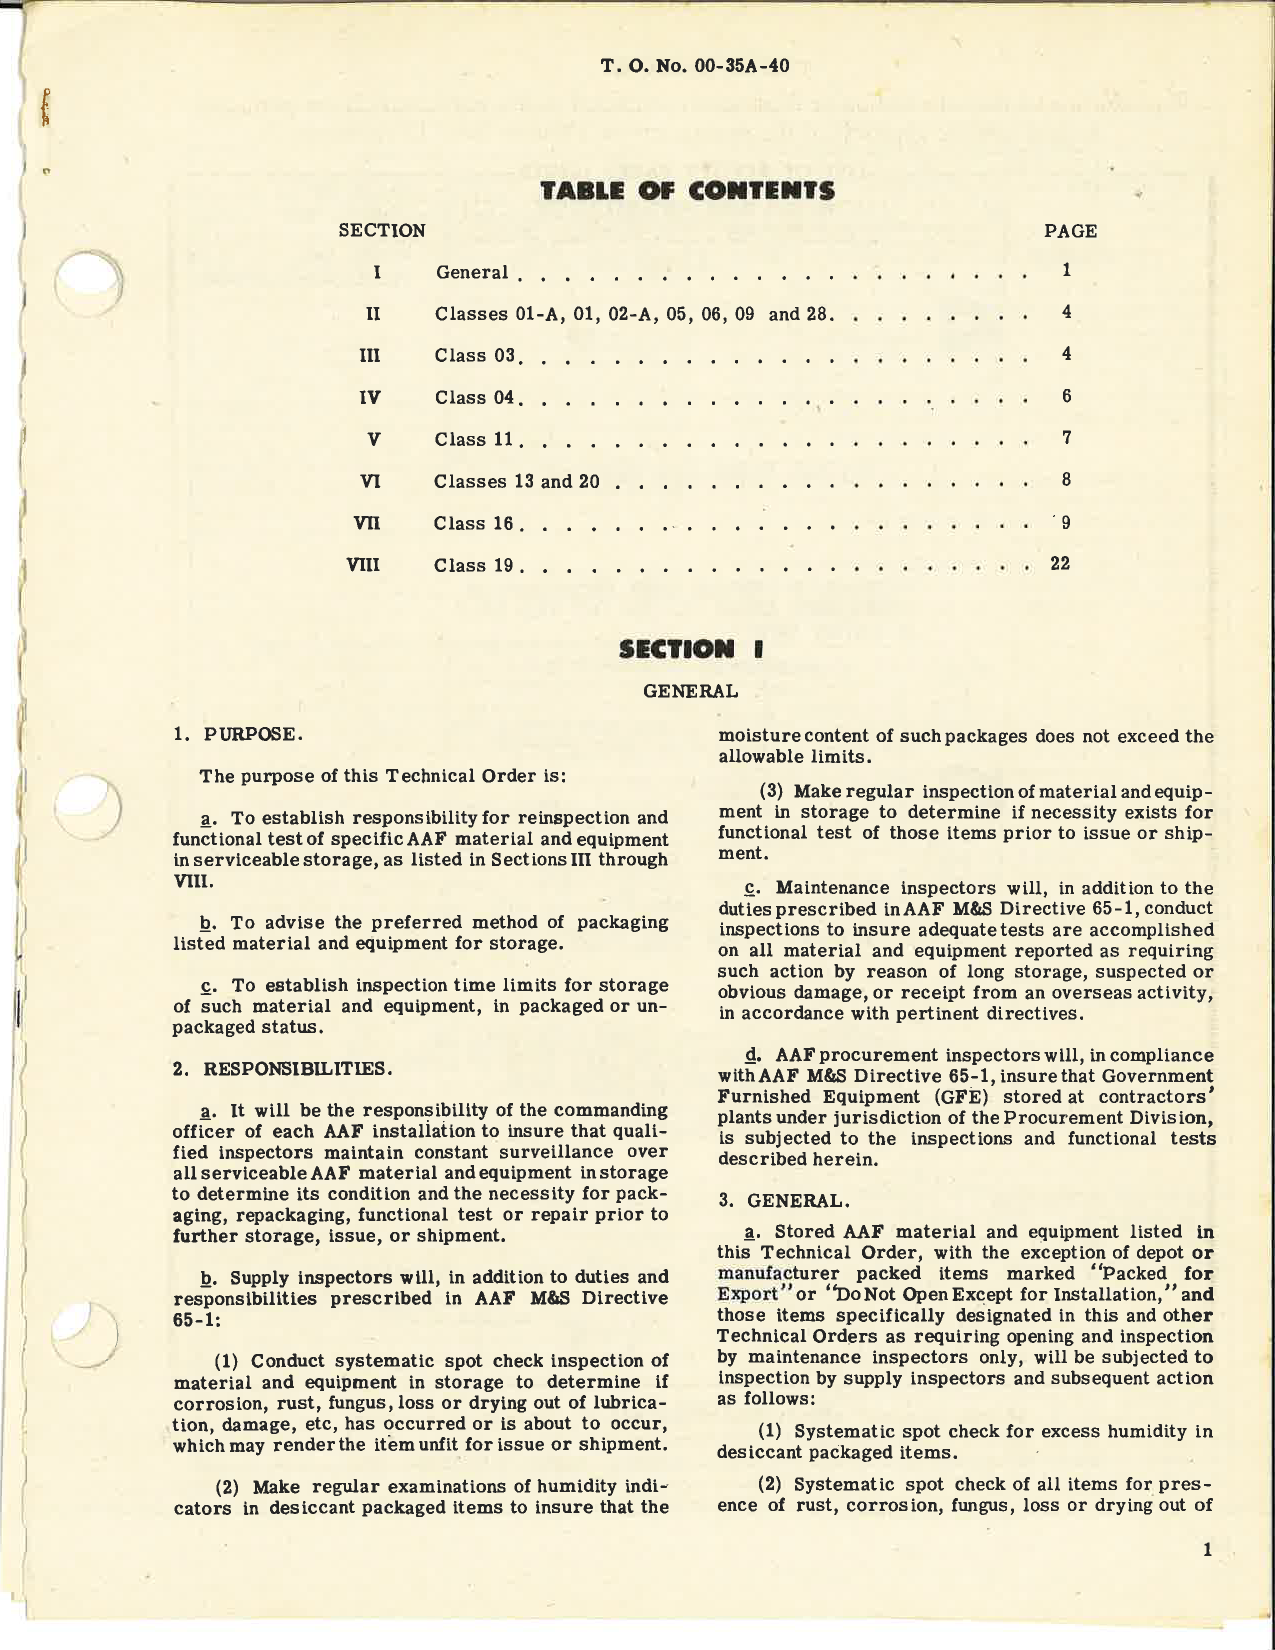 Sample page 3 from AirCorps Library document: Inspection and Functional Test of AAF Material and Equipment in Storage